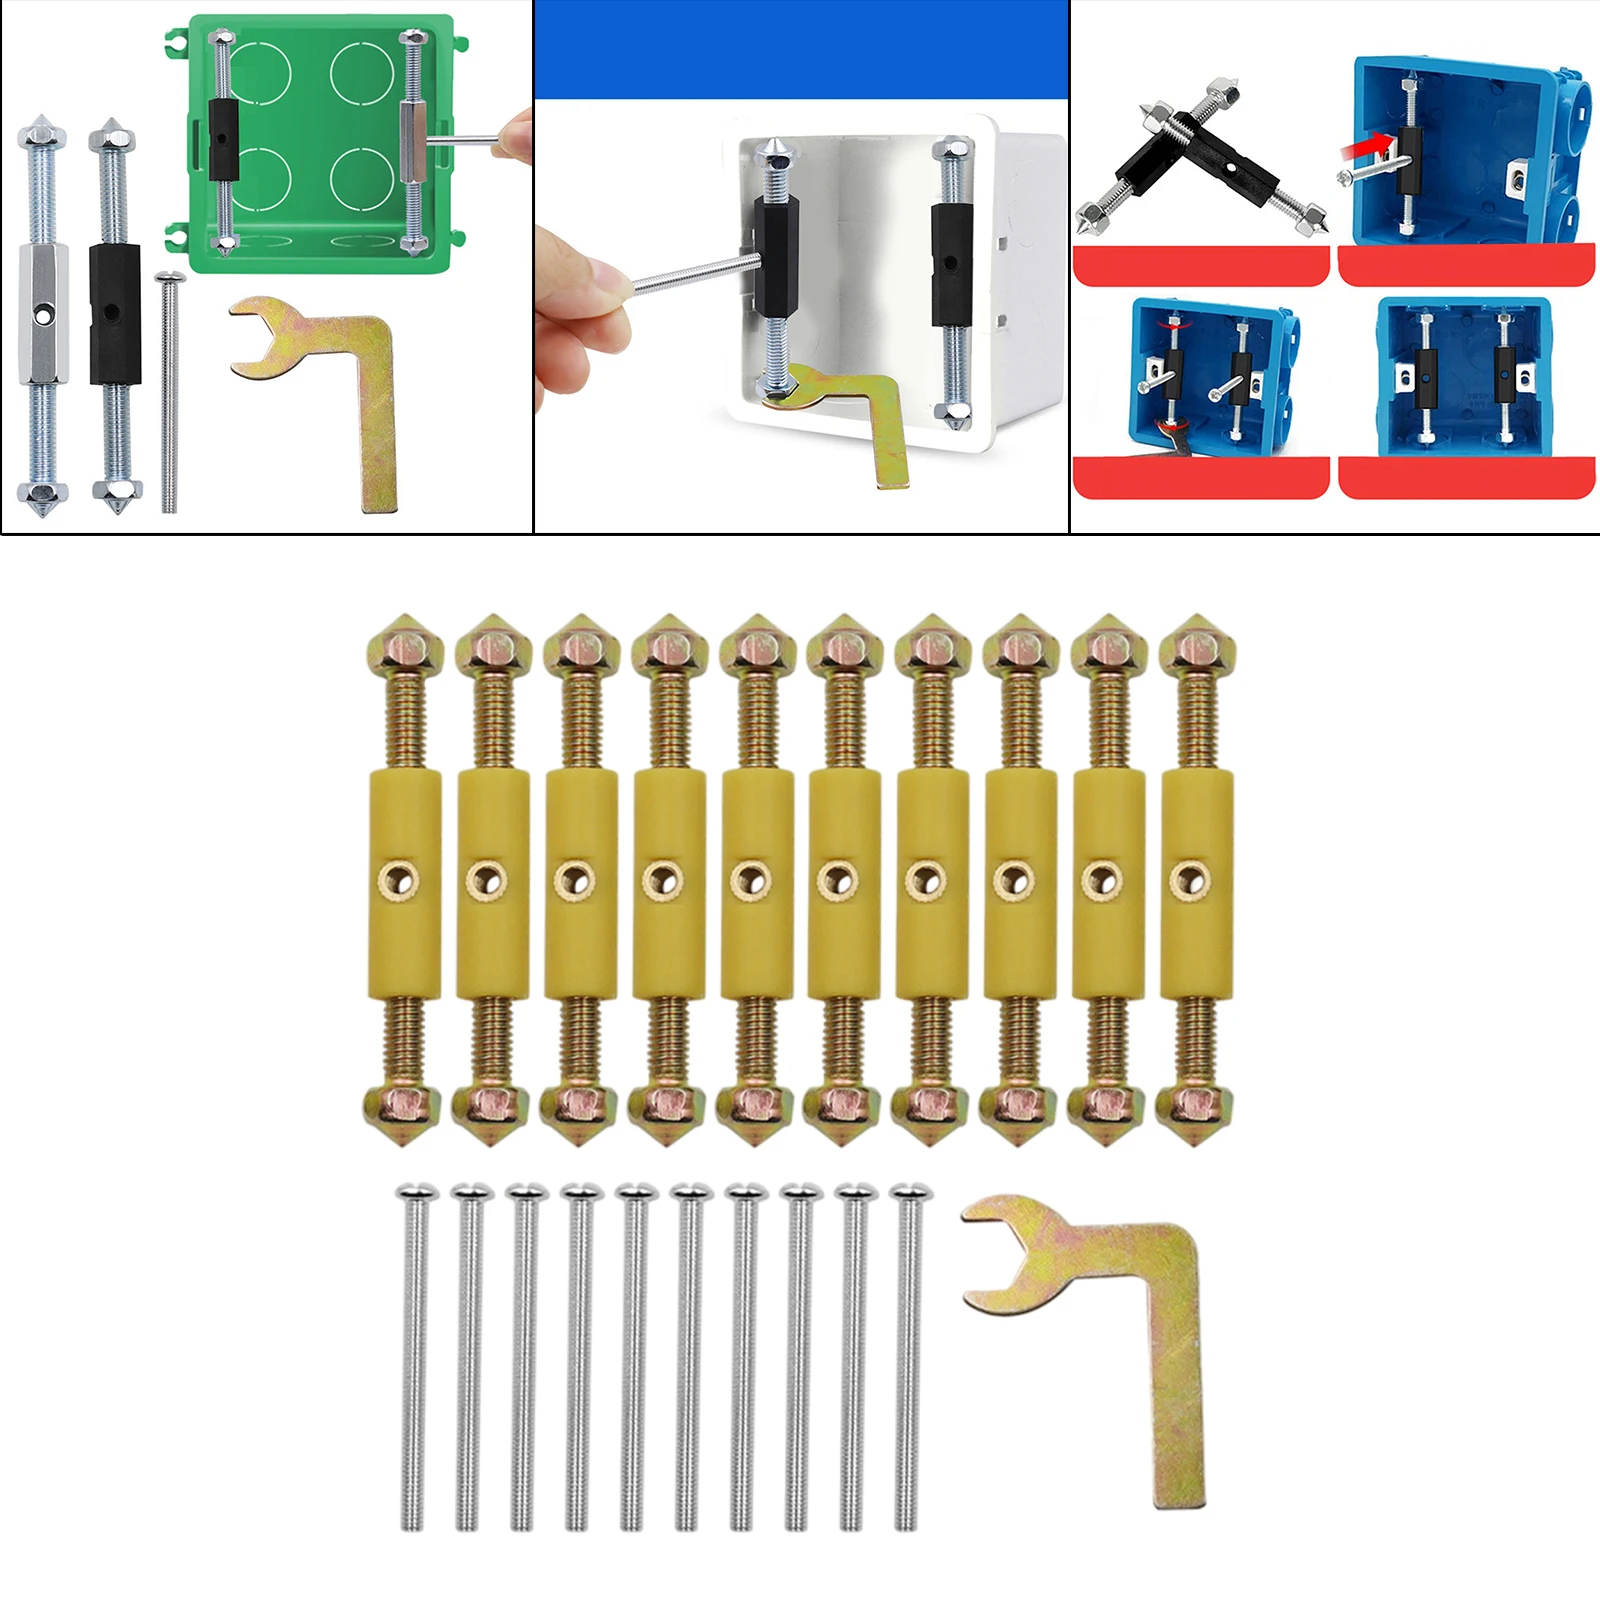 21Pcs/Set Cassette Screws Support Rod Kit, Repair Tool, Rust Resistant Adjustable Fixer Wrench for Wall Switch Junction Box